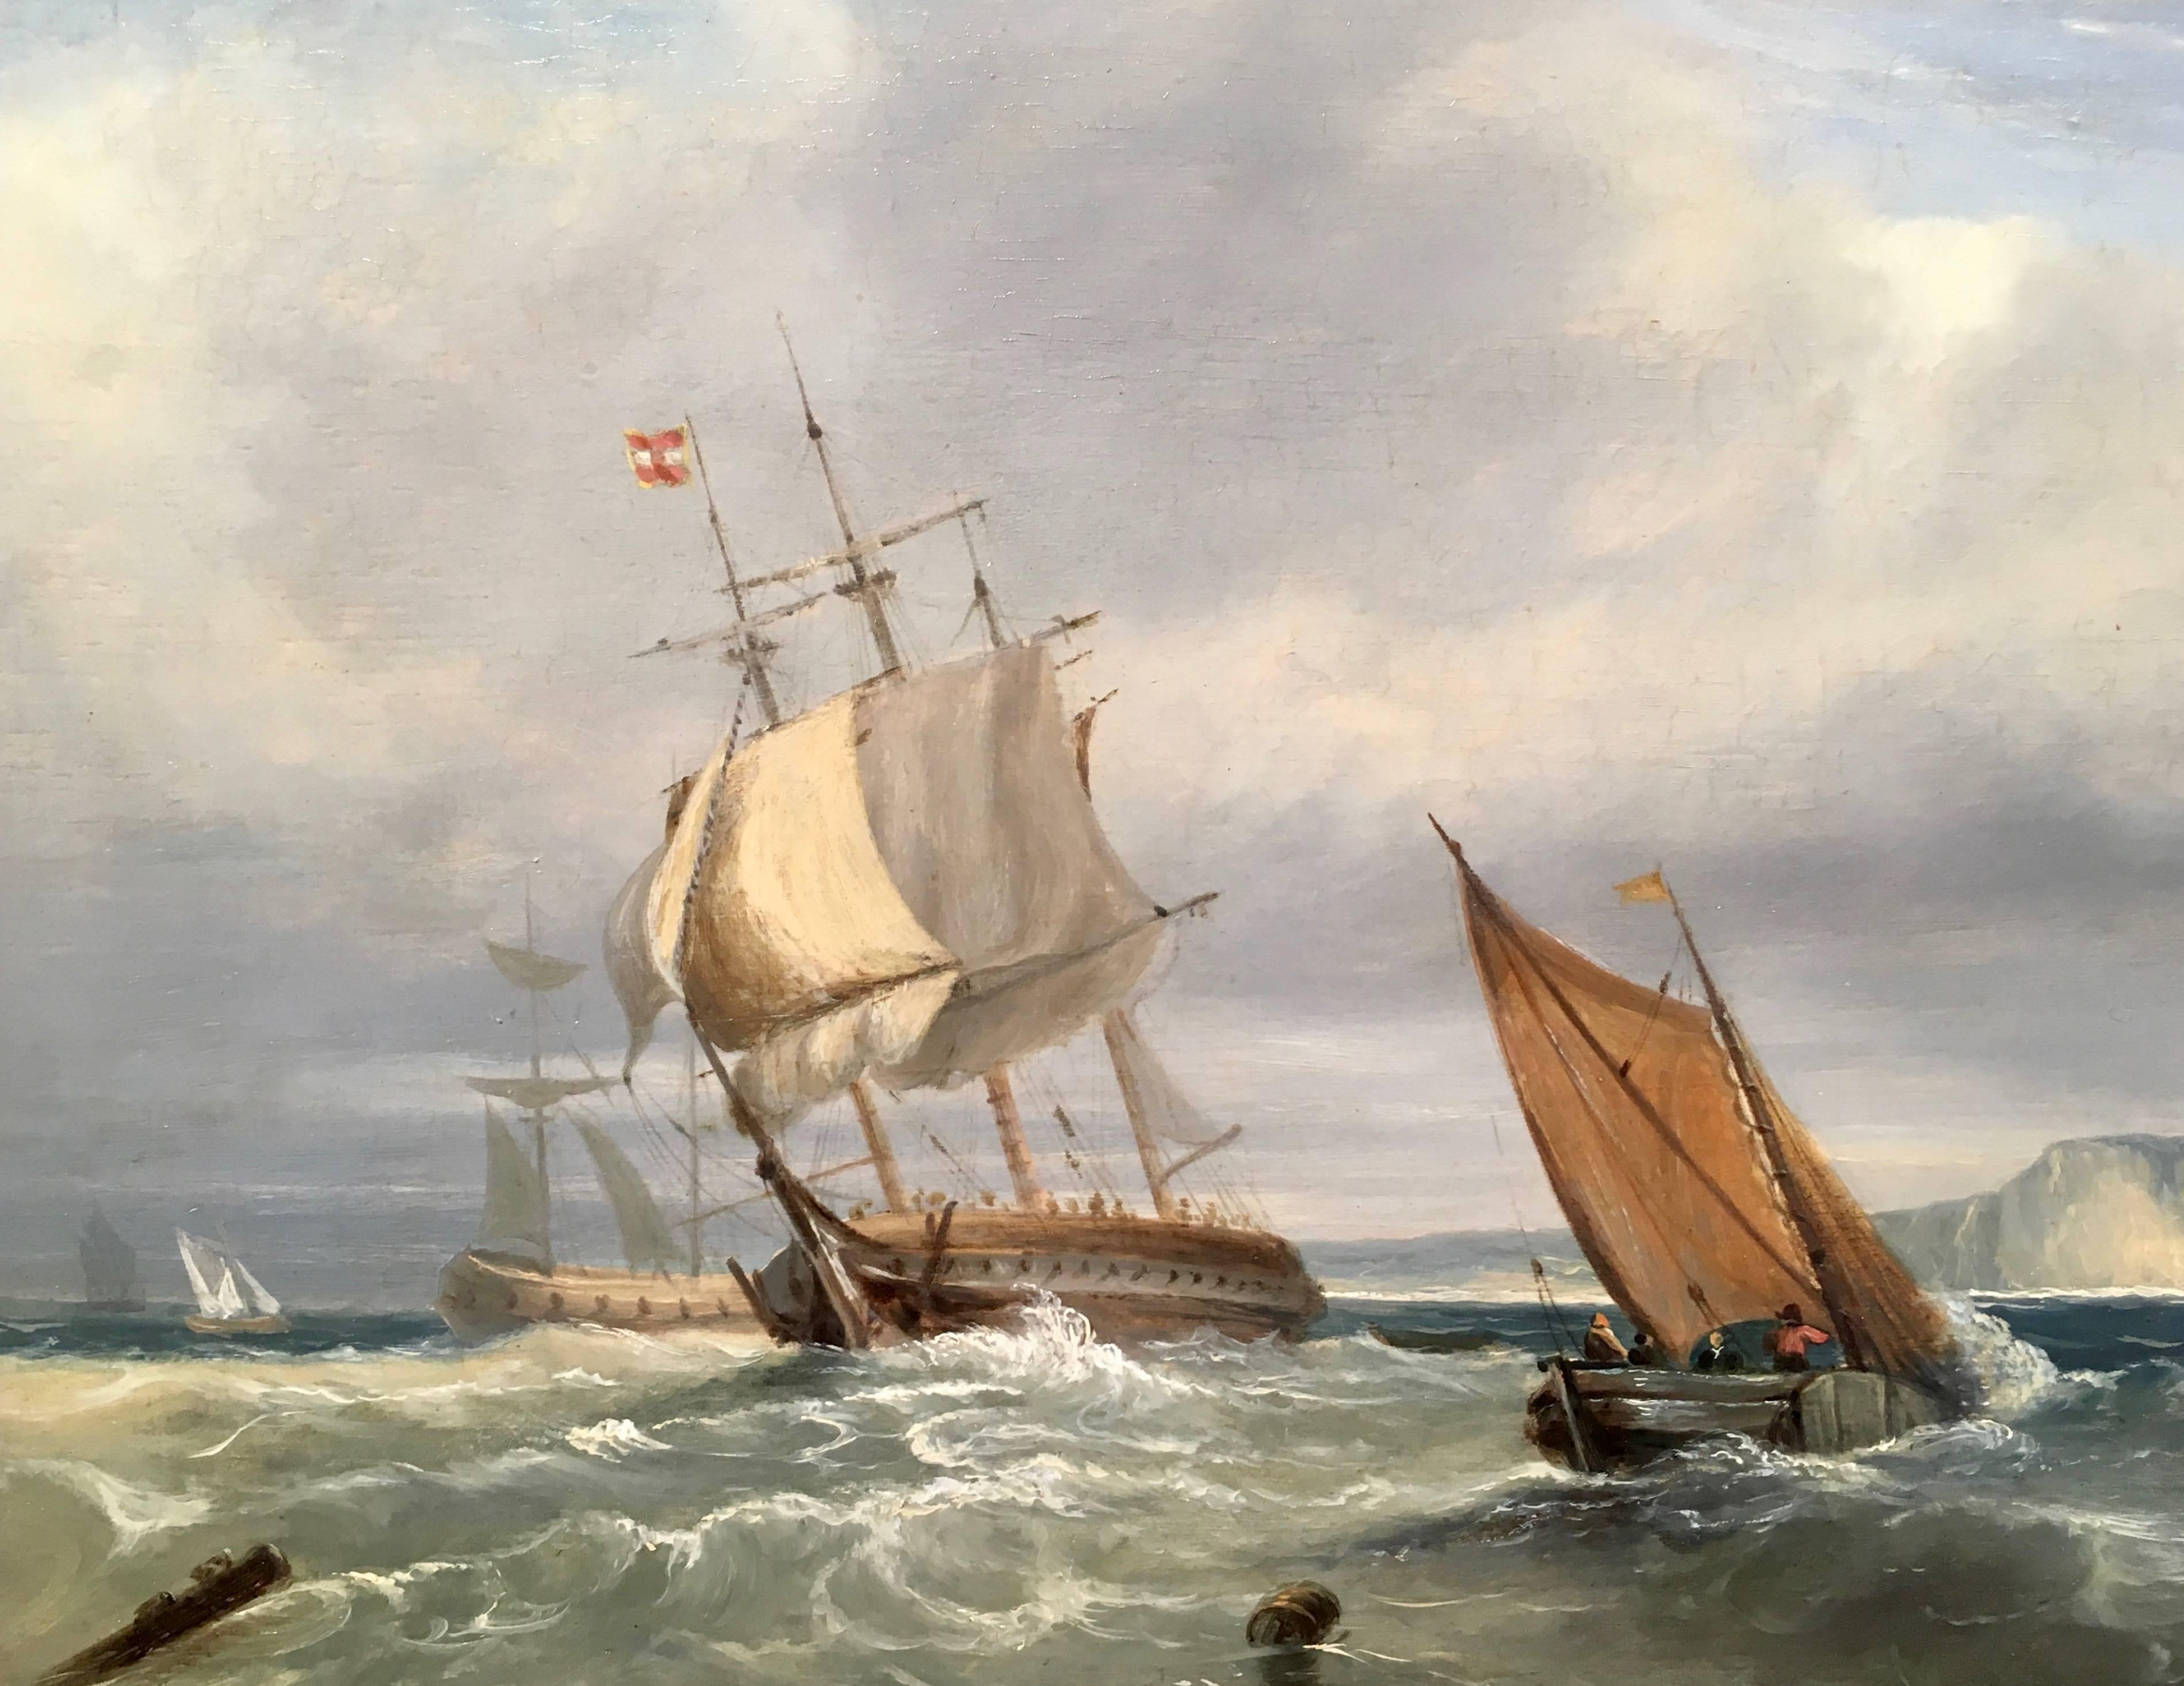 Scottish marine scene with Battle ships and fishing vessels in a rough sea - Painting by John 'Jock' Wilson